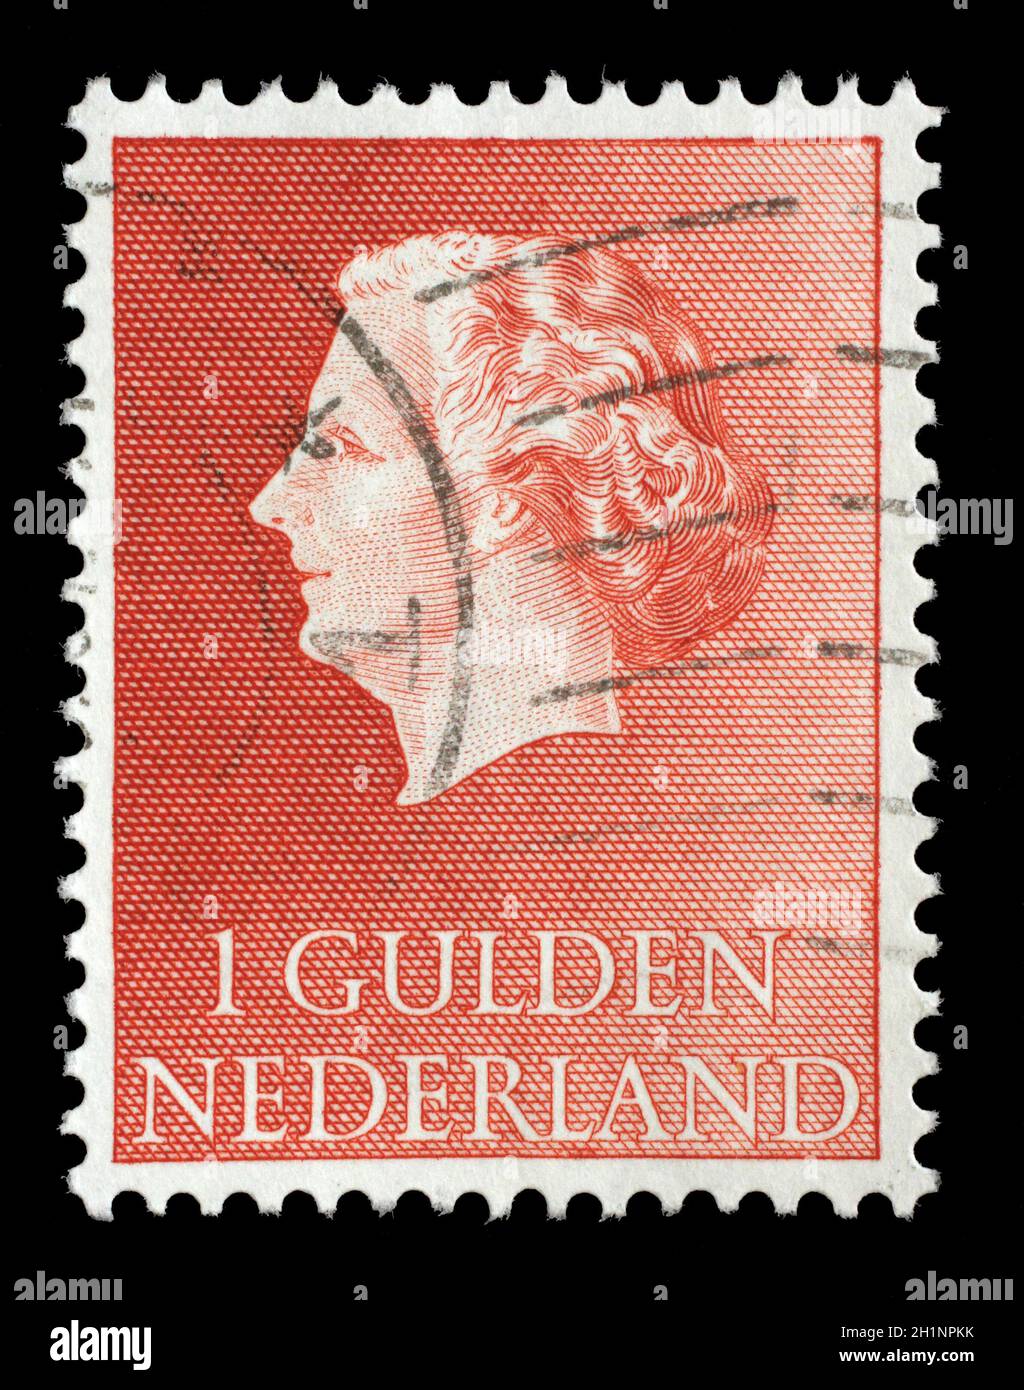 Stamp printed in Netherlands shows portrait of Queen Juliana. Was Queen of Netherlands in the period September 4, 1948 to April 30, 1980. Stock Photo